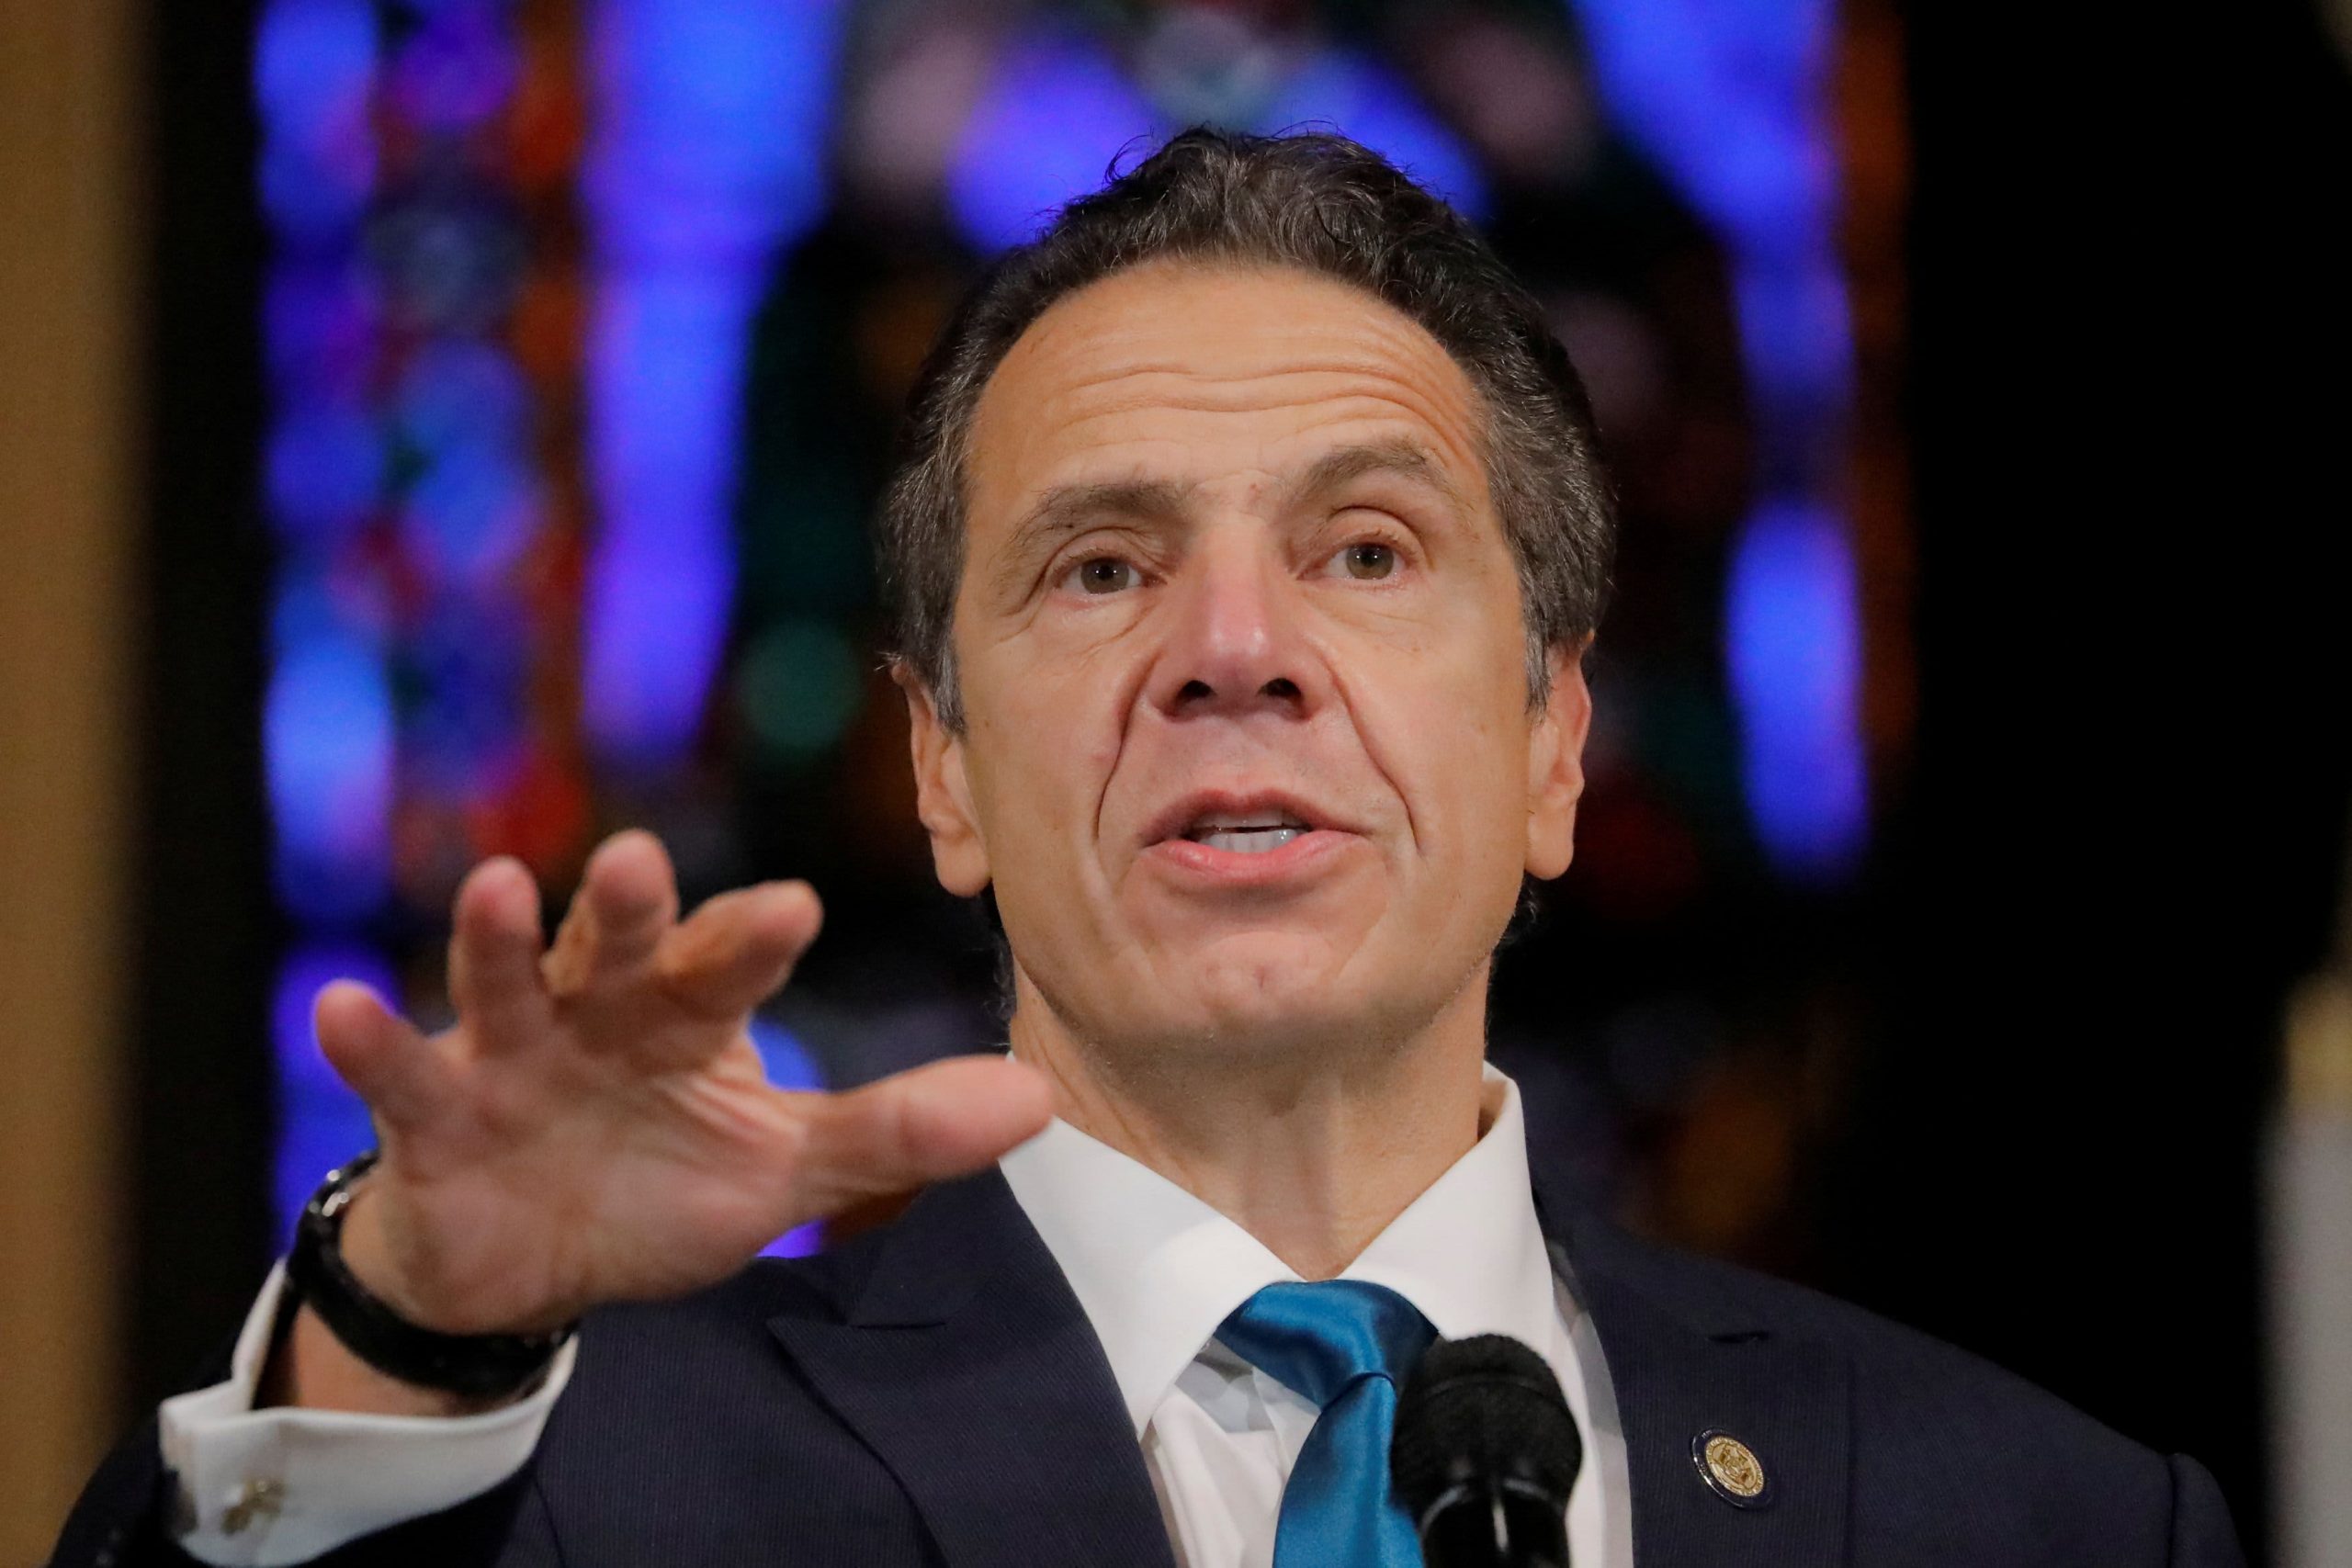 South Africa Covid variant detected for the first time in New York patient, Cuomo says